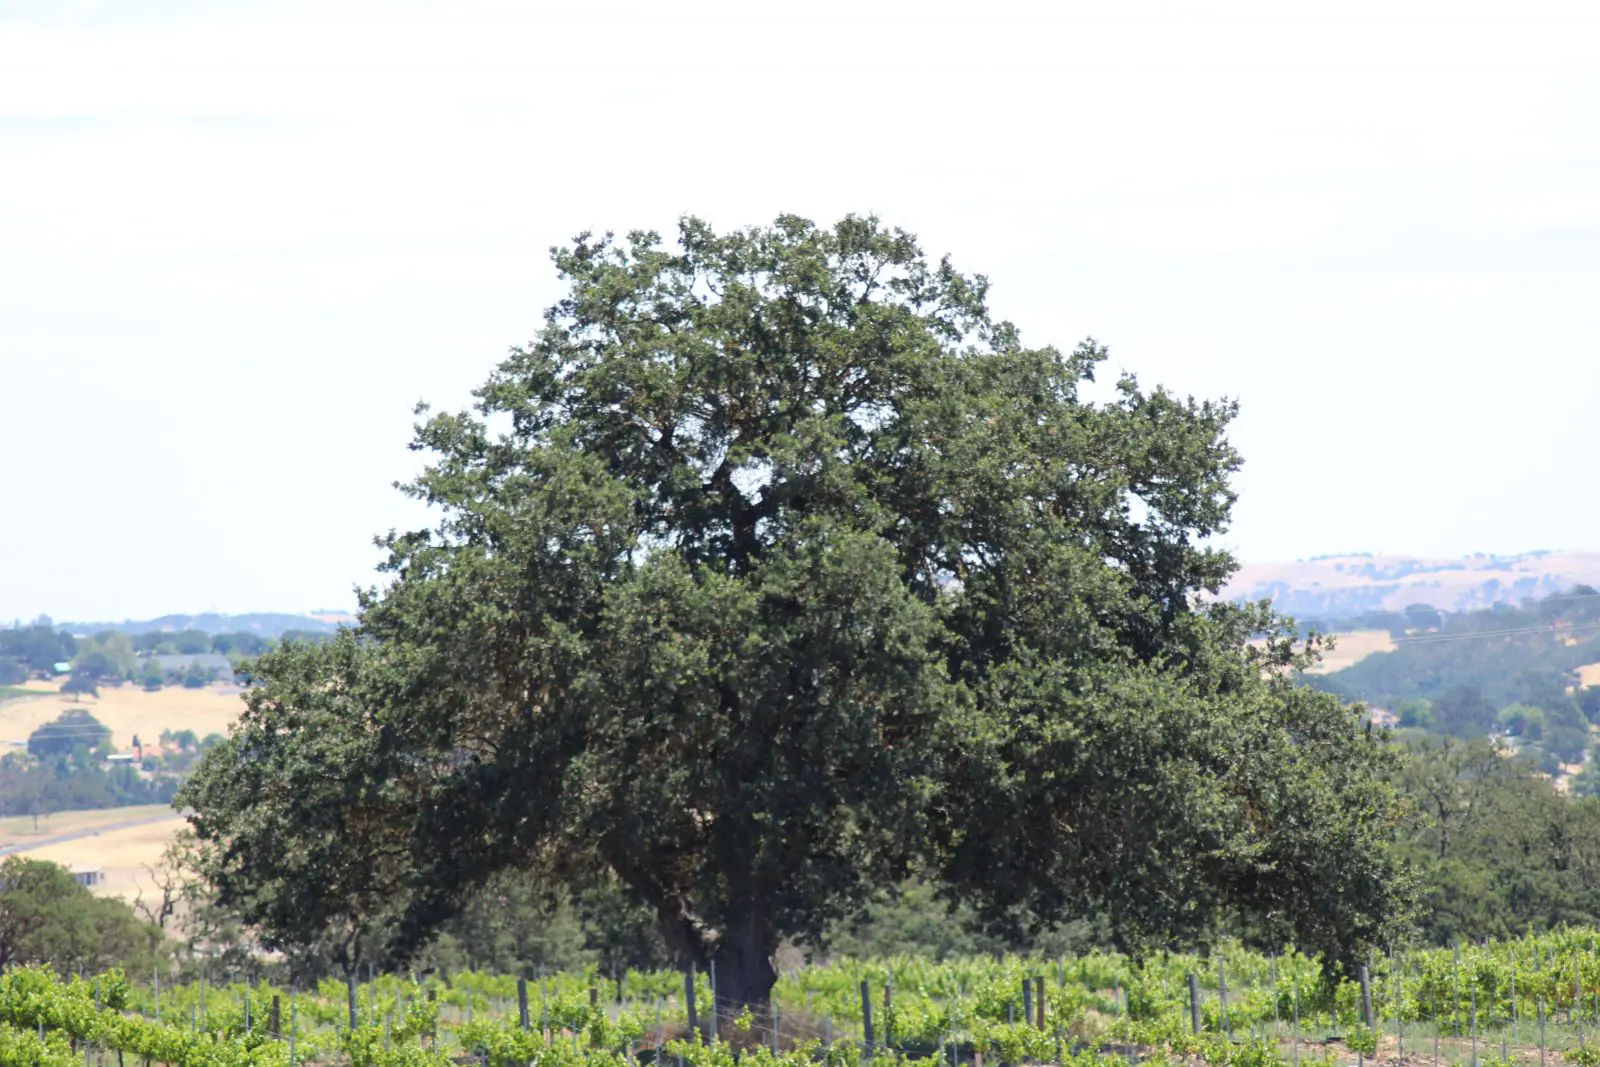 Doce Robles Winery & Vineyard